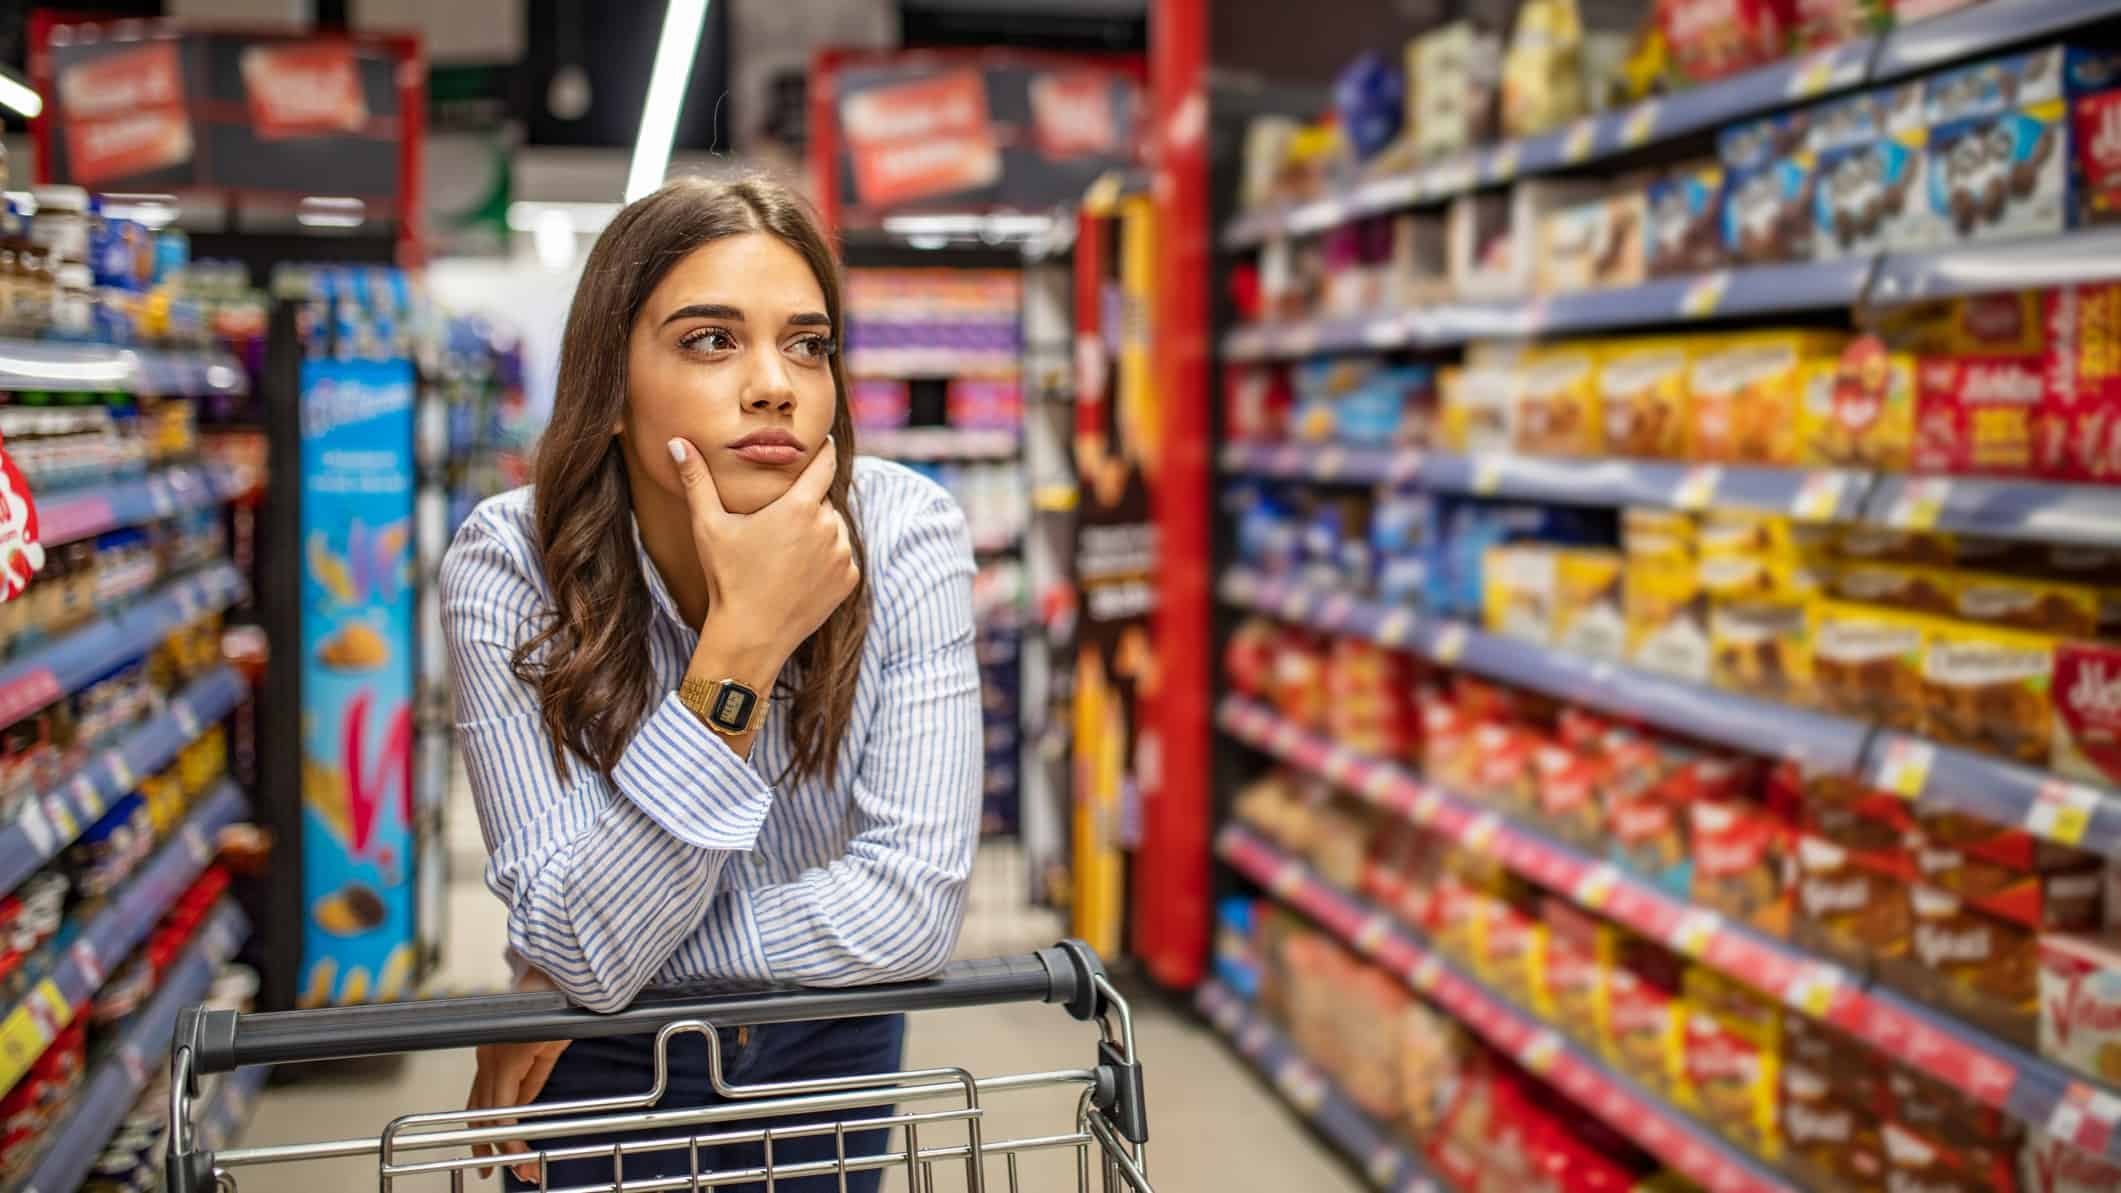 a woman leans on her shopping trolley as she rests her chin in her hand as if thinking as she stands in the middle of a grocery supermarket shopping aisle with a serious look on her face.